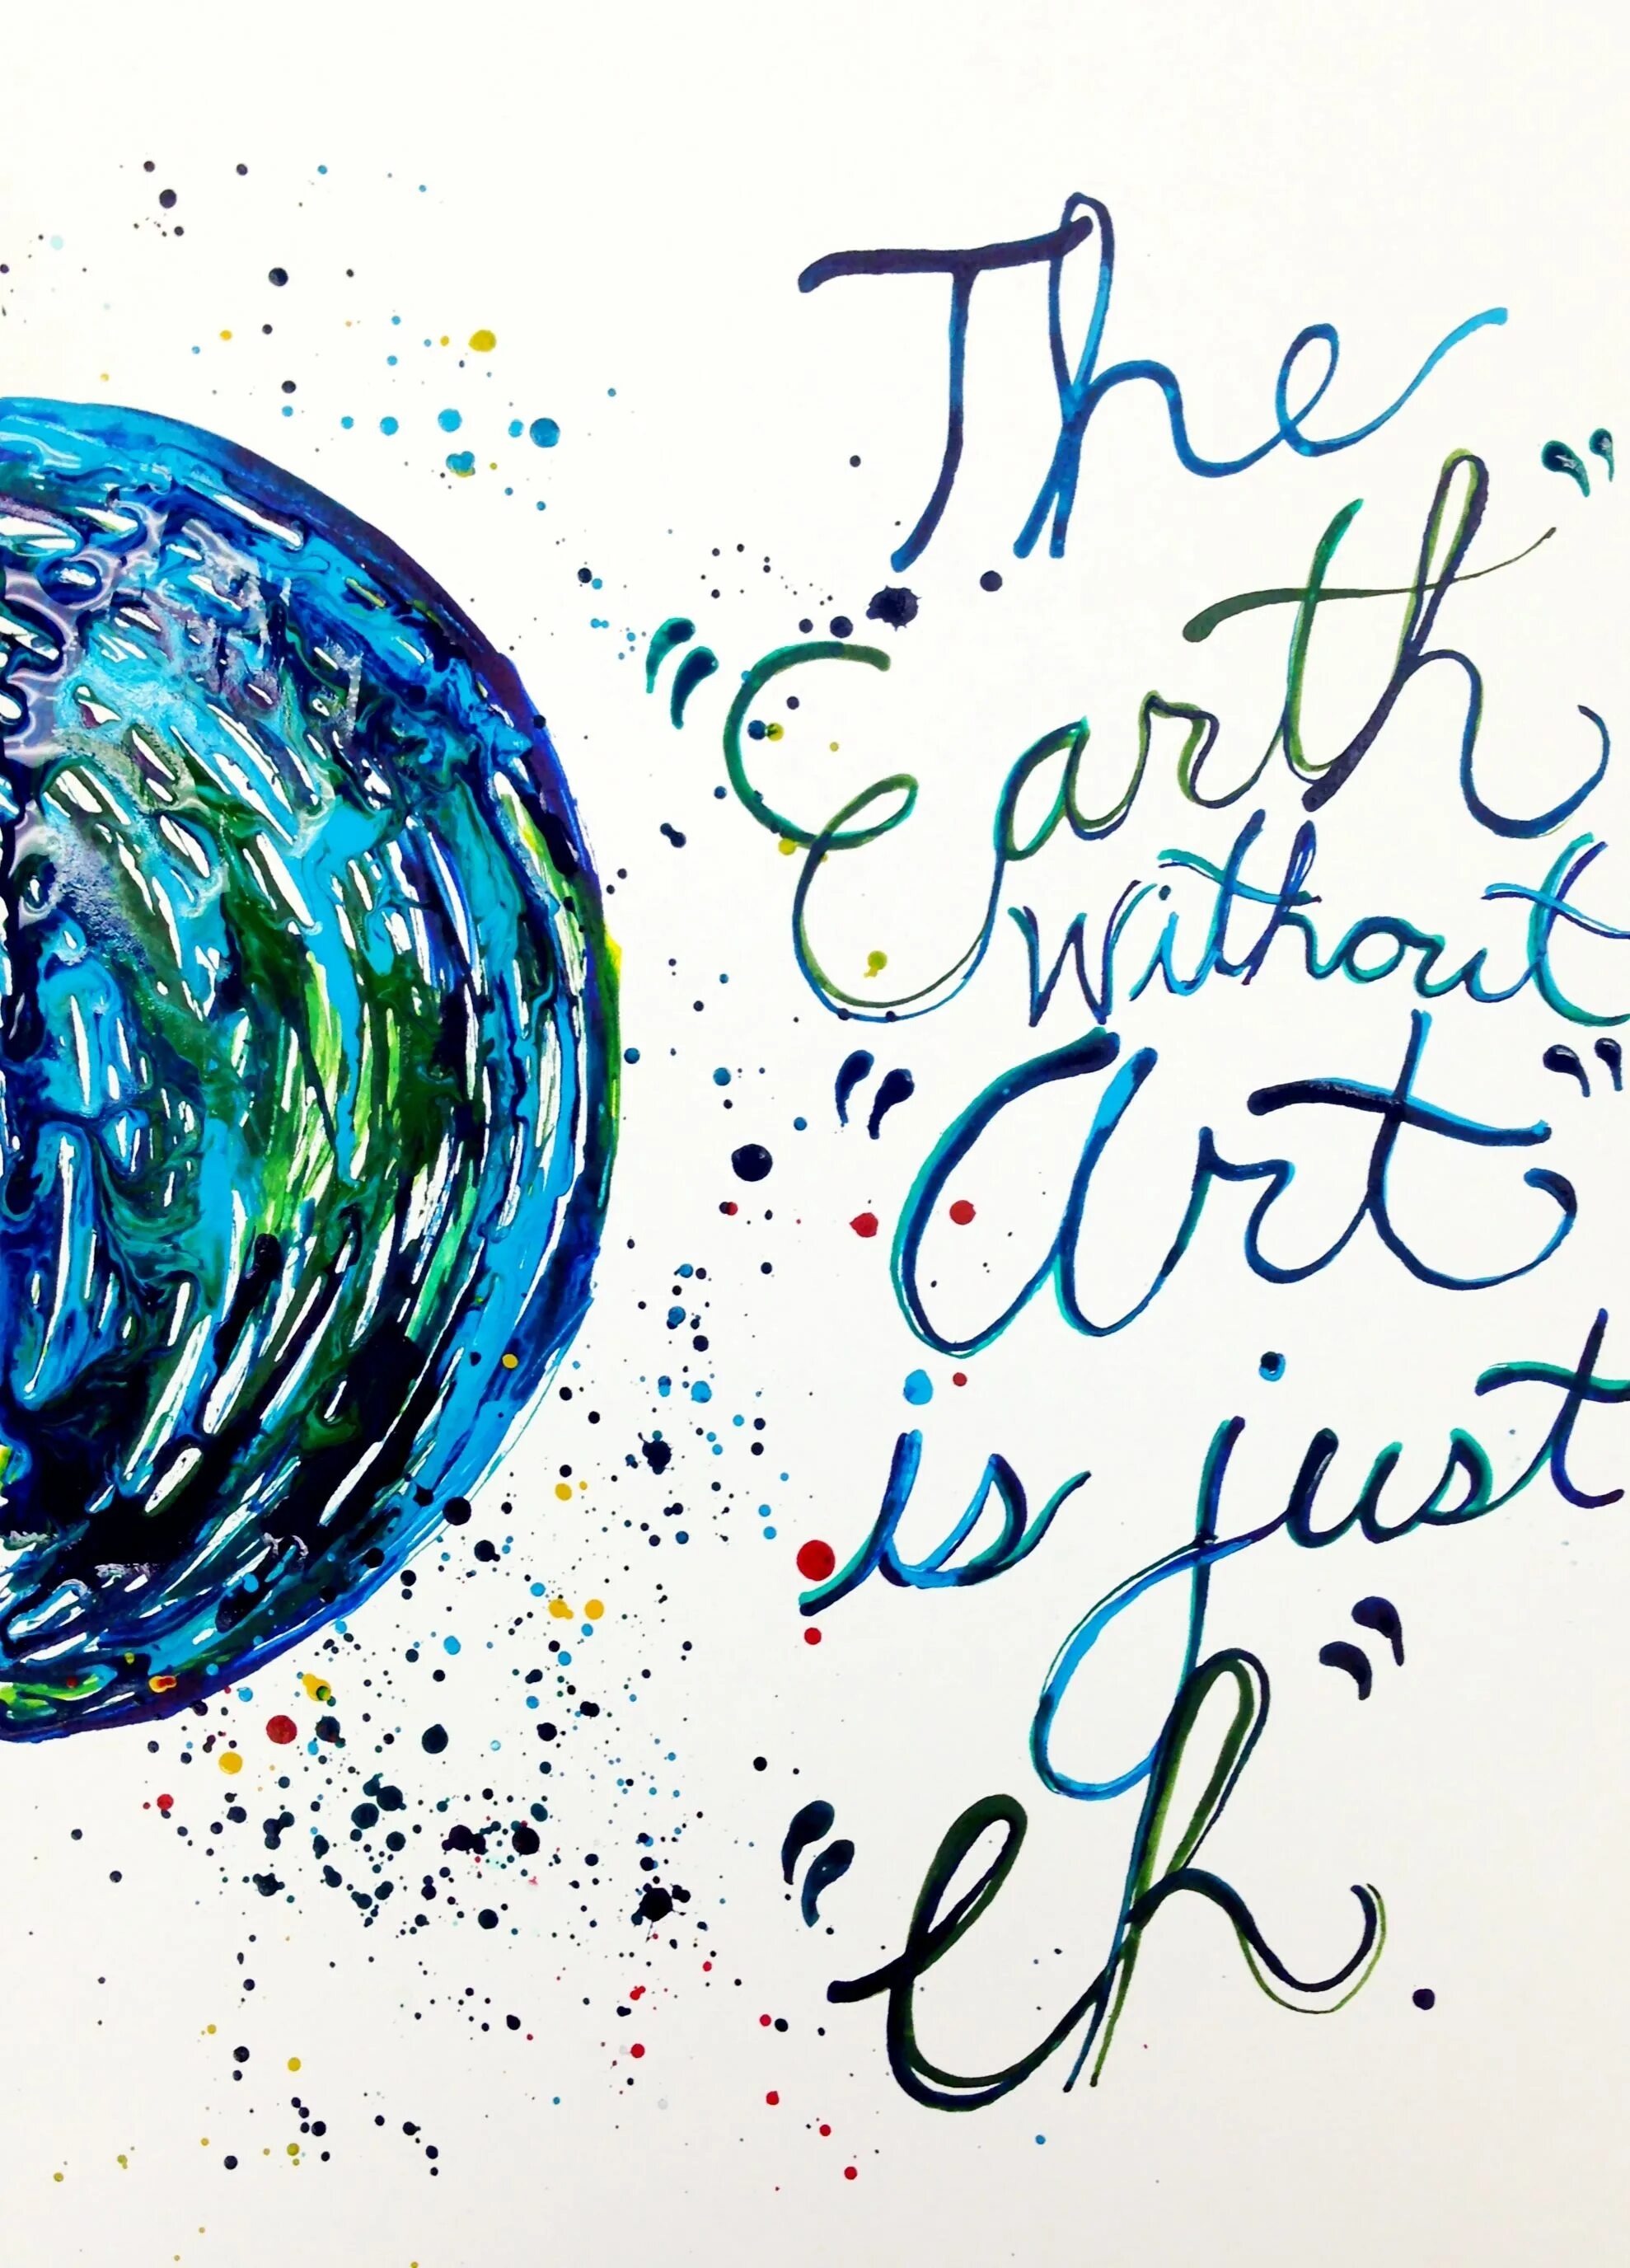 Earth without Art is just eh. Earth without Art. Art is. The Earth without Art футболка.